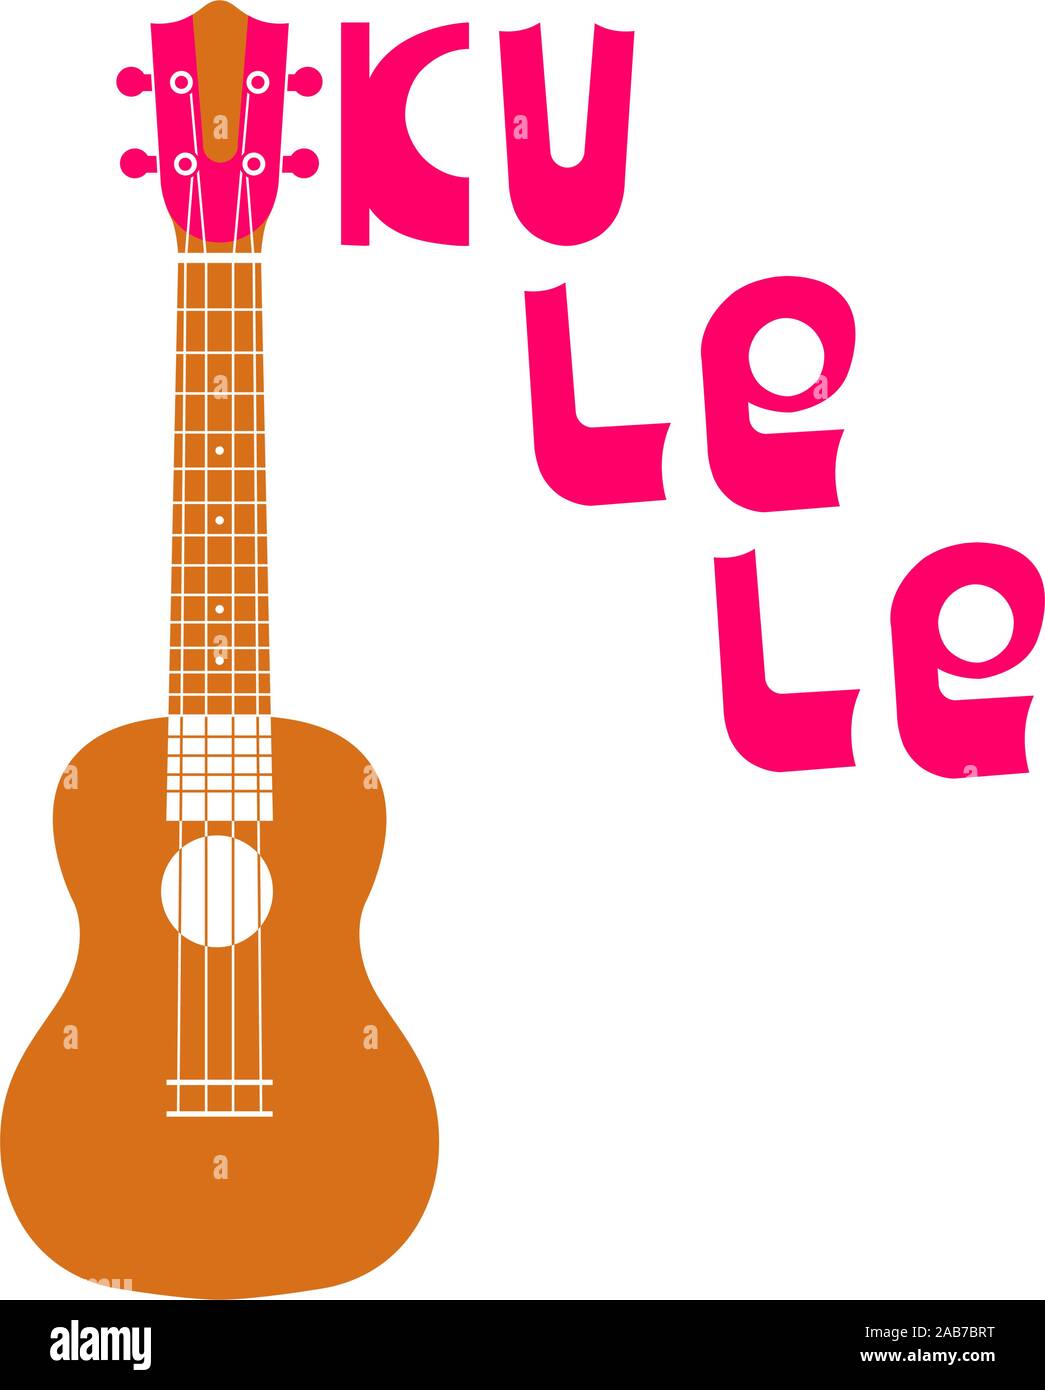 Ukulele Hawaiian guitar. And the lettering of the word ukulele. String musical instrument. Simple vector illustration. Logo, badge, icon Stock Vector